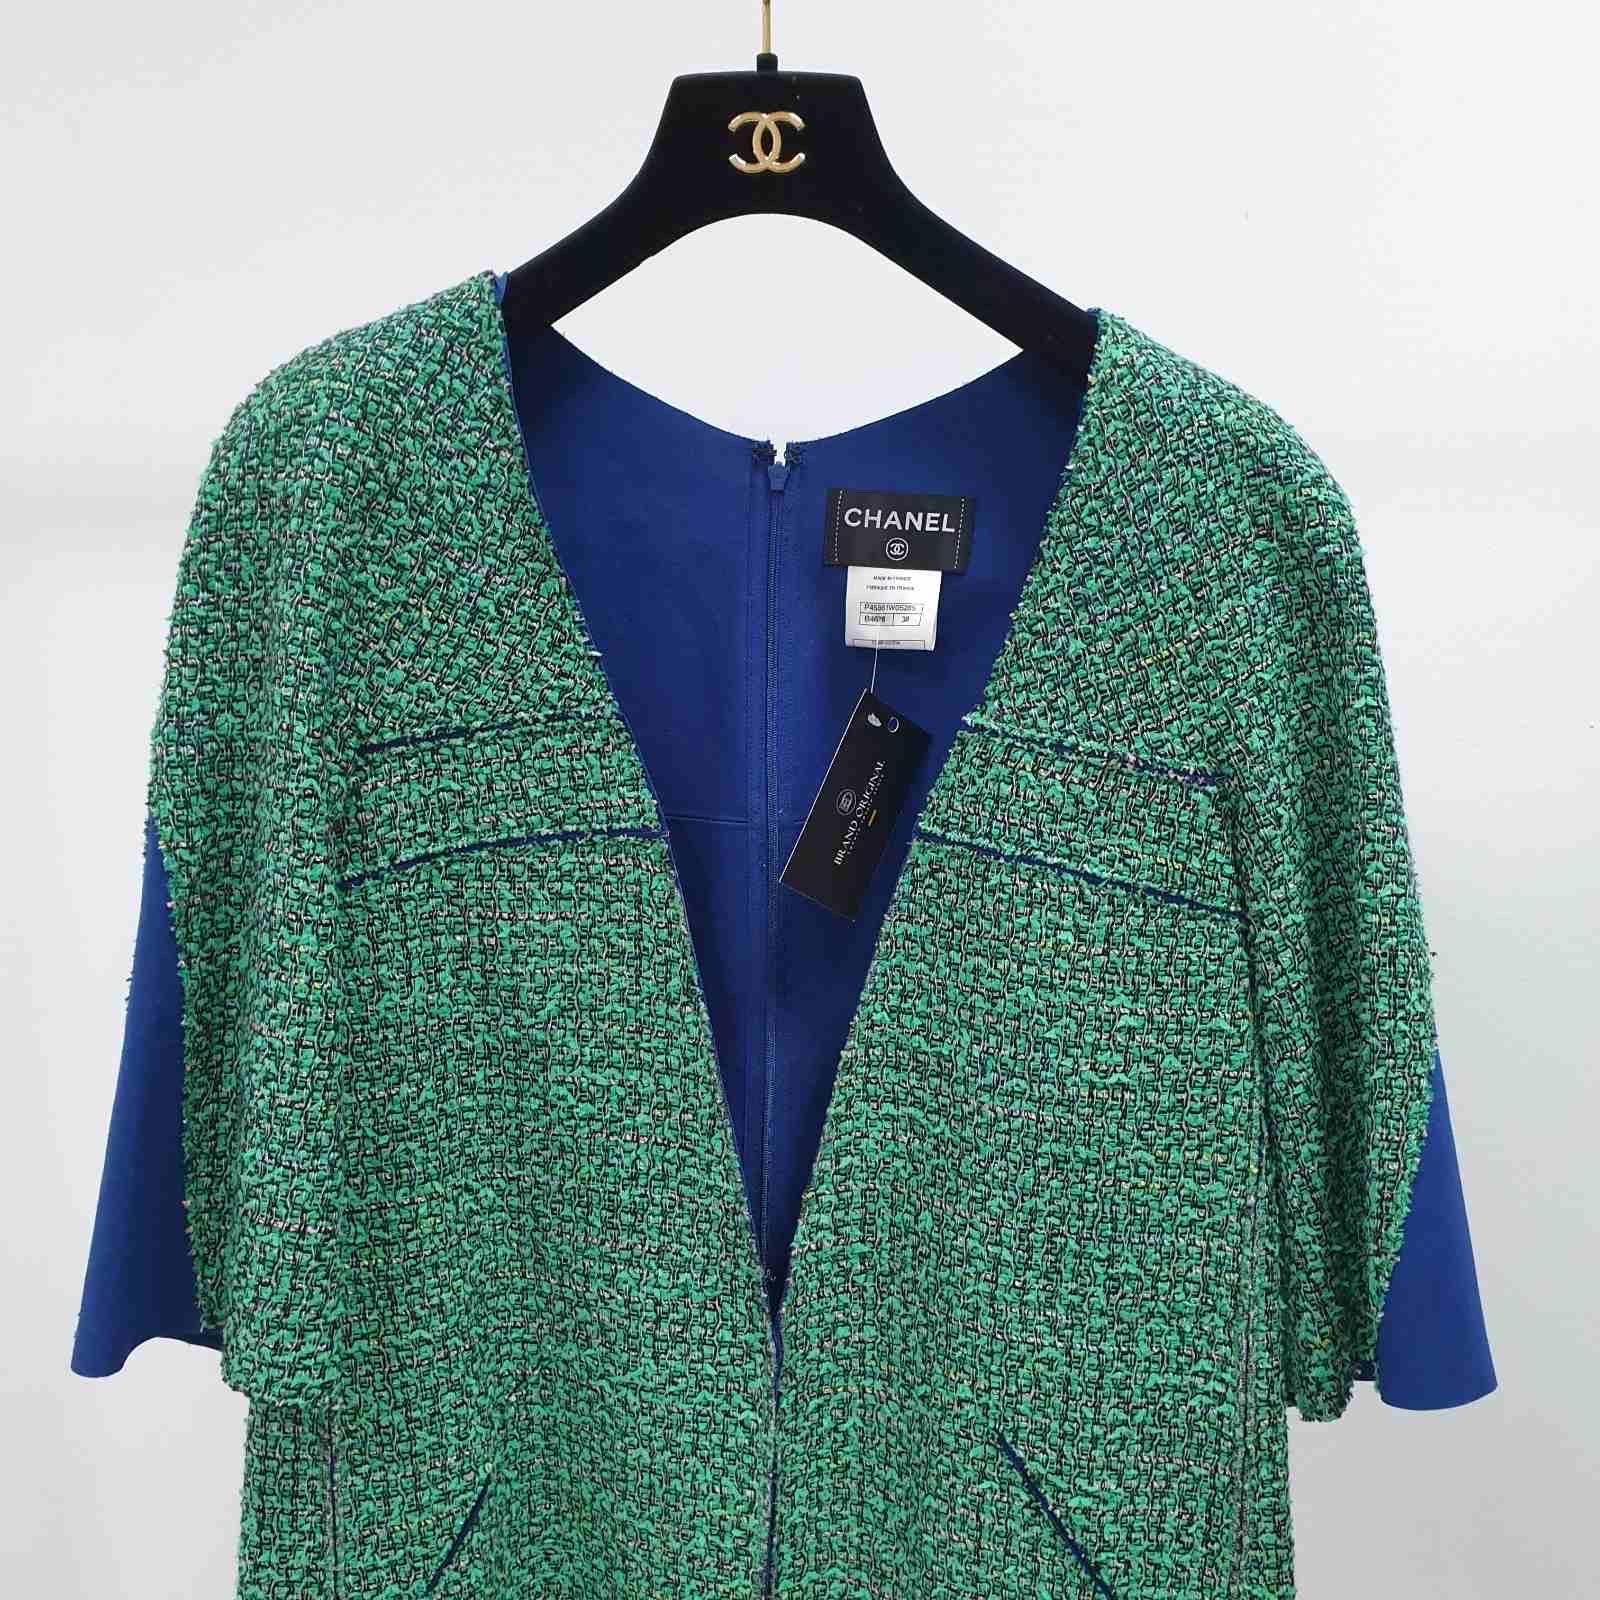 Chanel SS2013 Green Coat  In Excellent Condition For Sale In Krakow, PL